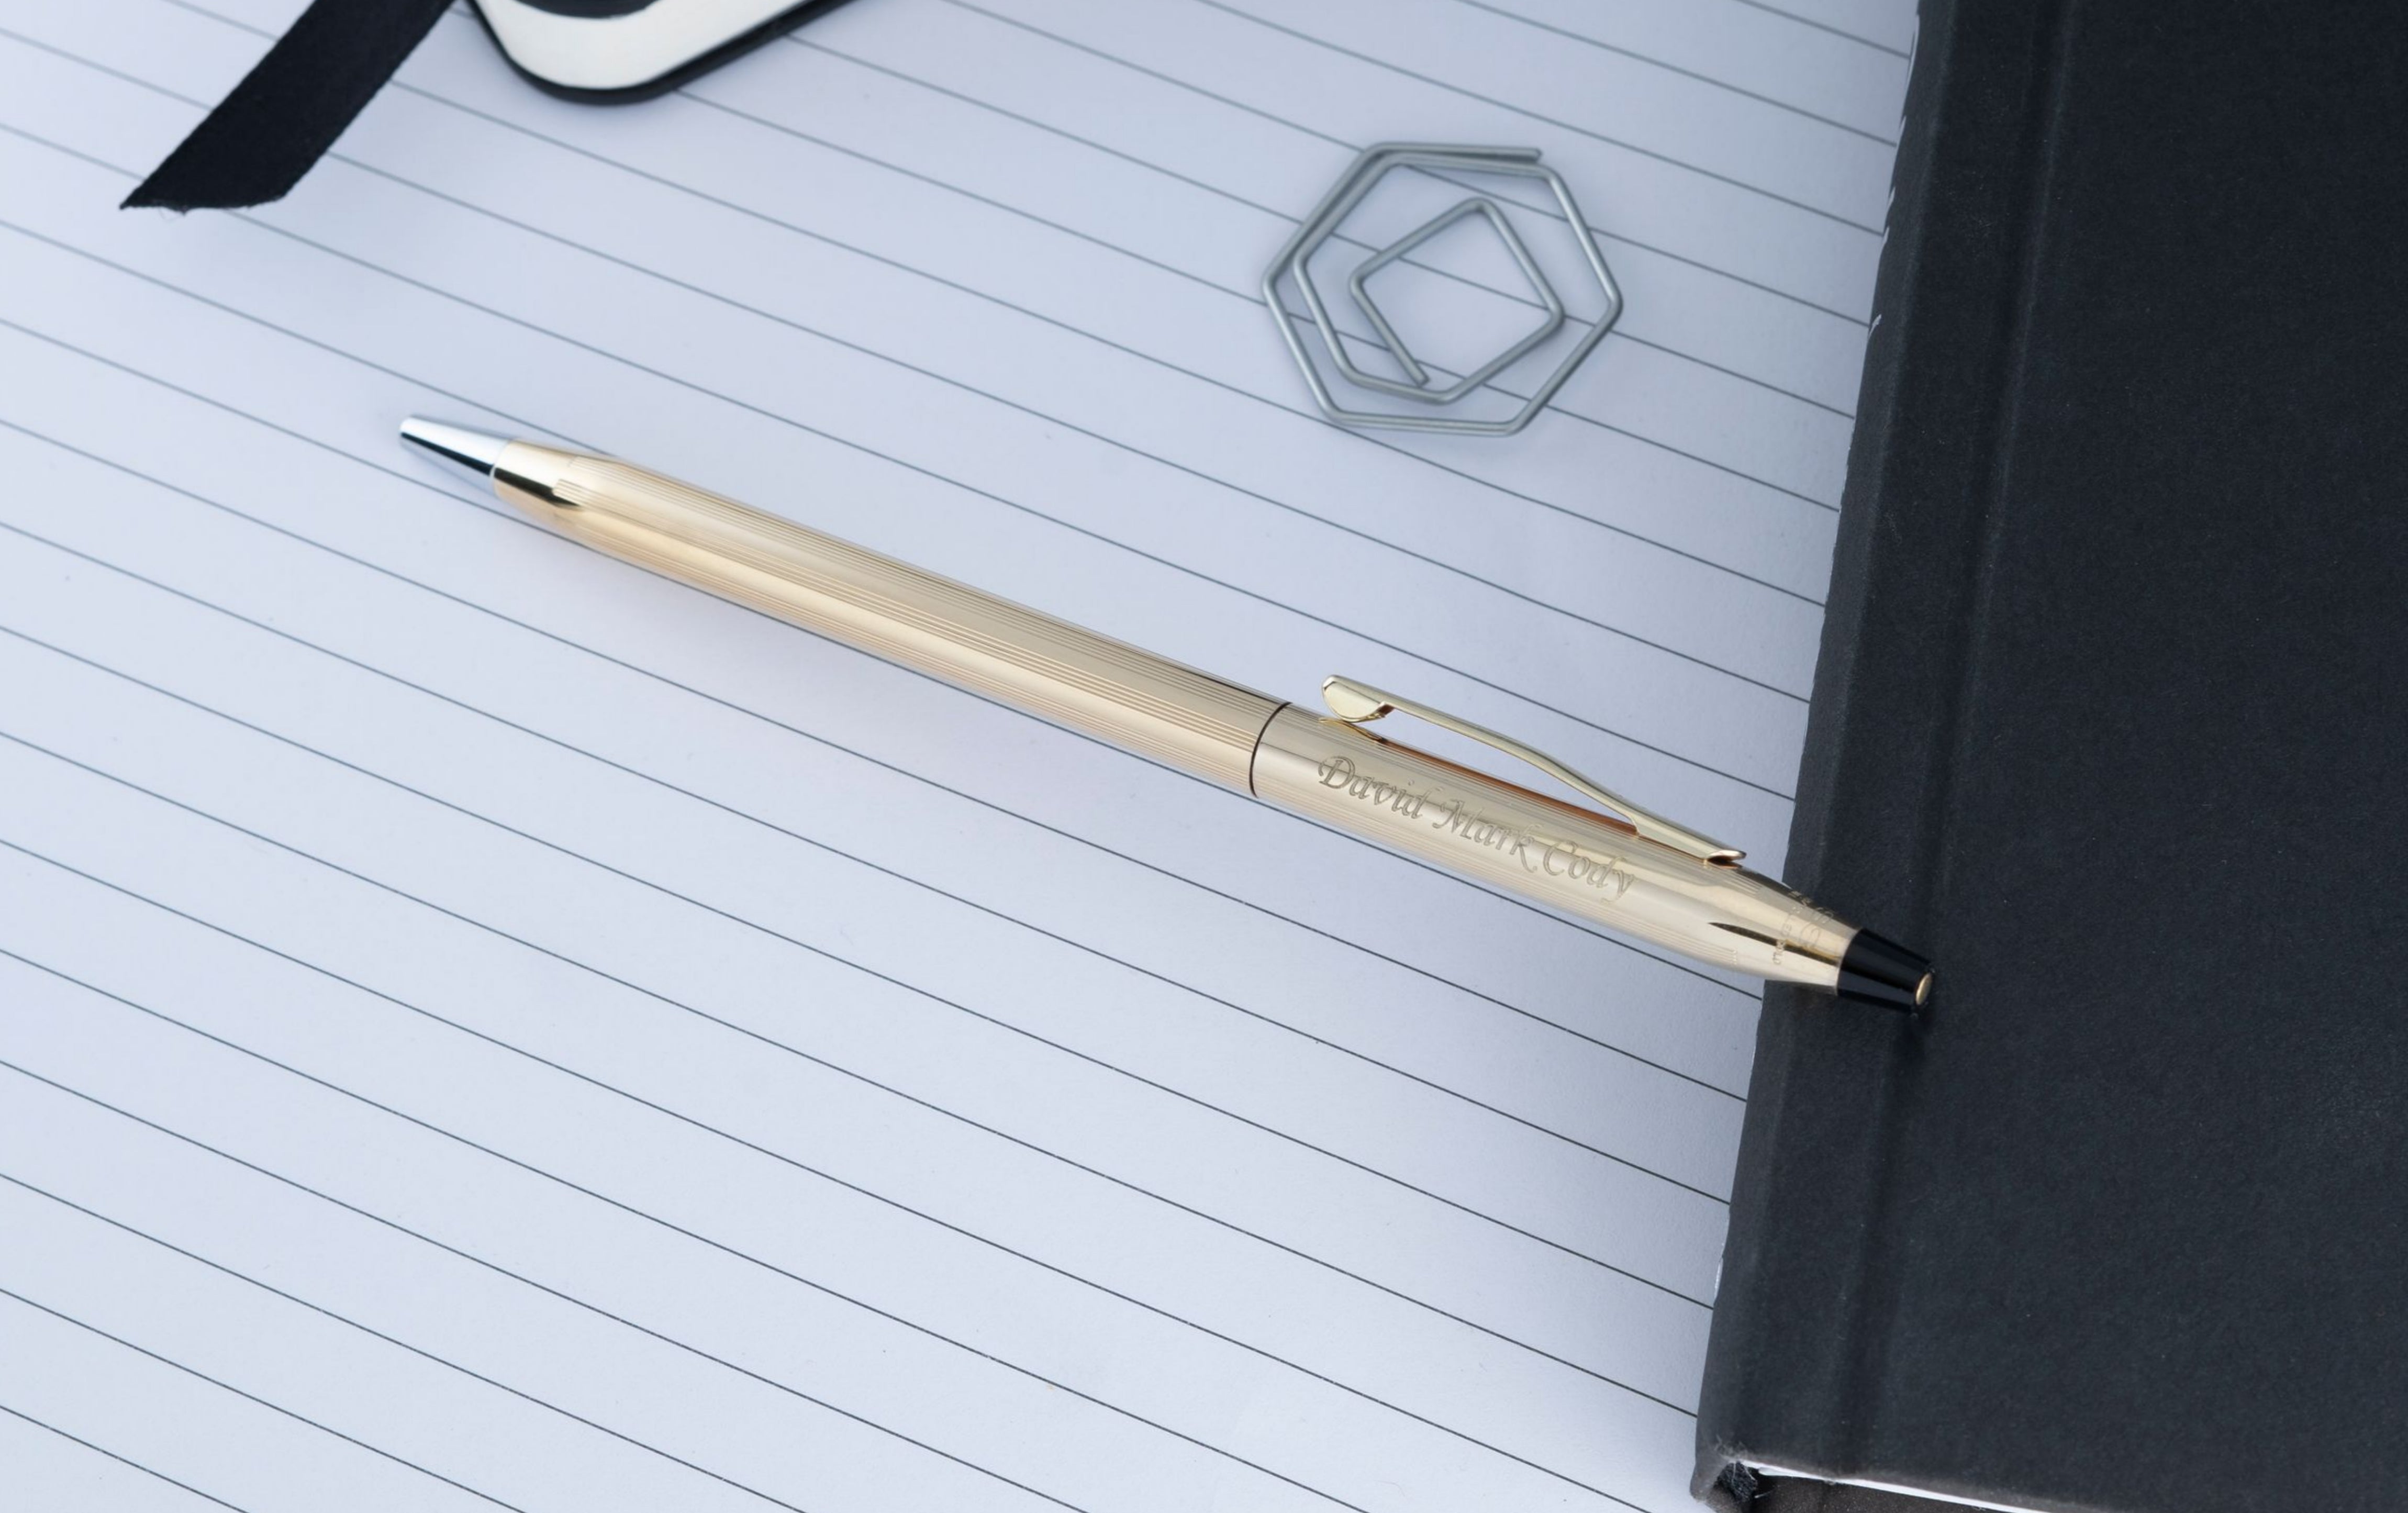 Engraved Classic Century Gold Ballpoint placed on notebook with desk items